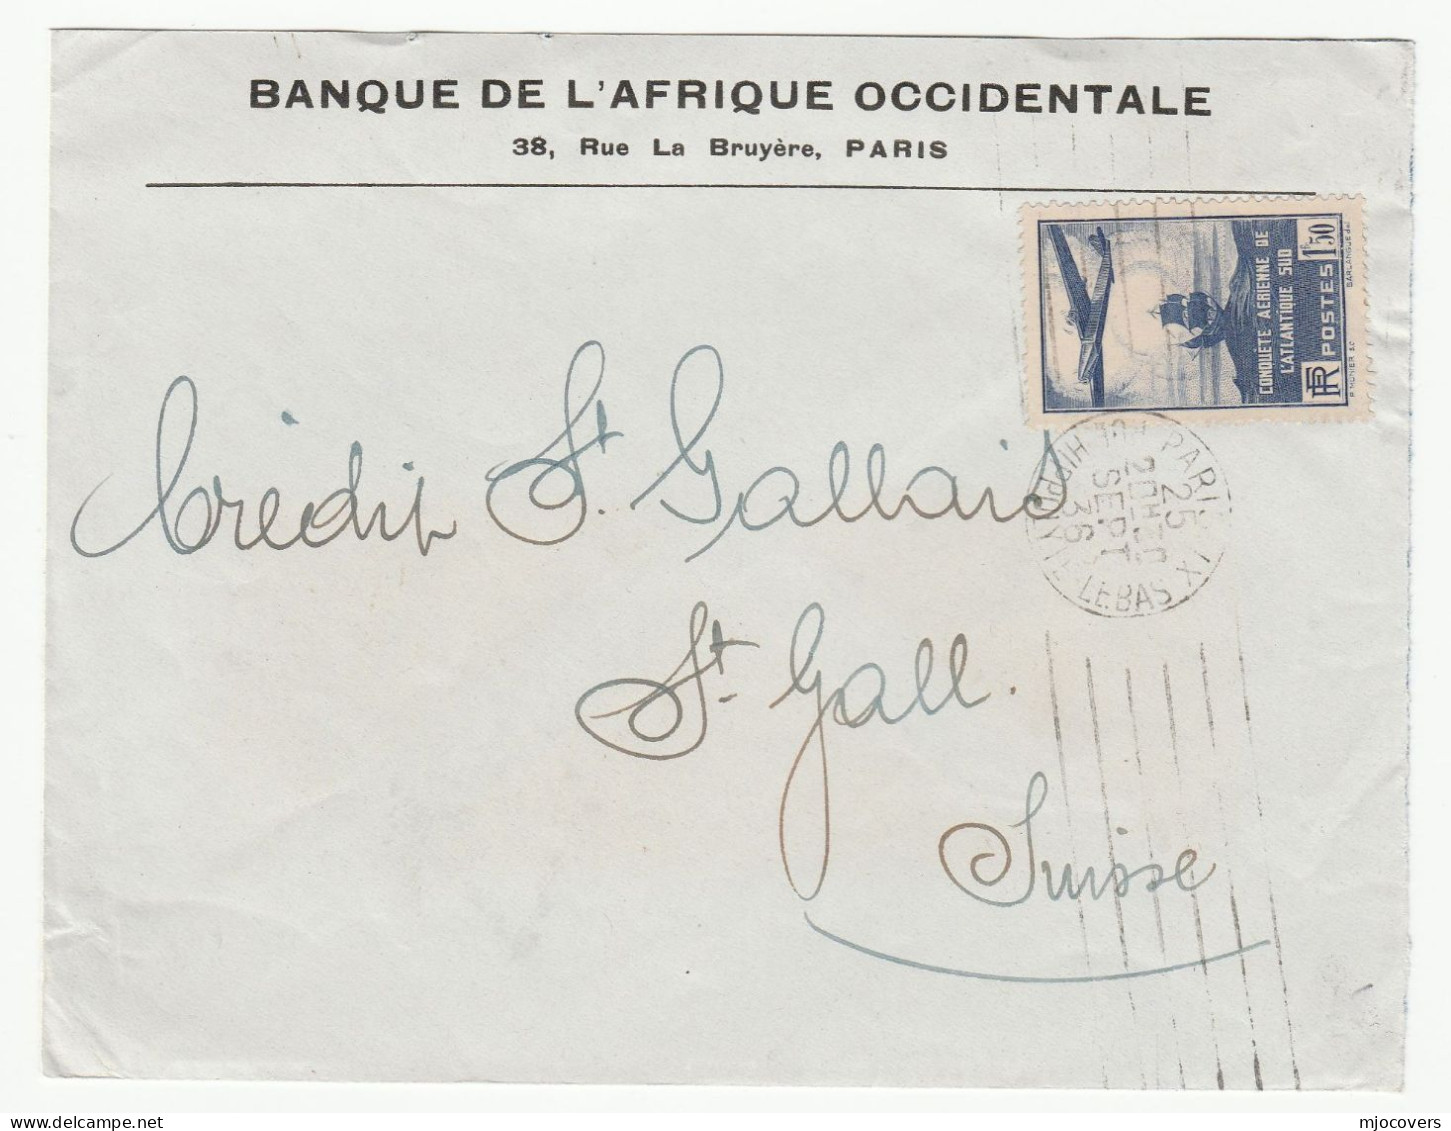 1936 FRANCE Cover Afrique Occidental BANK Paris To Switzerland 1f50 SOUTH  ATLANTIC AIRMAIL  STAMP Aircraft Aviation - Covers & Documents